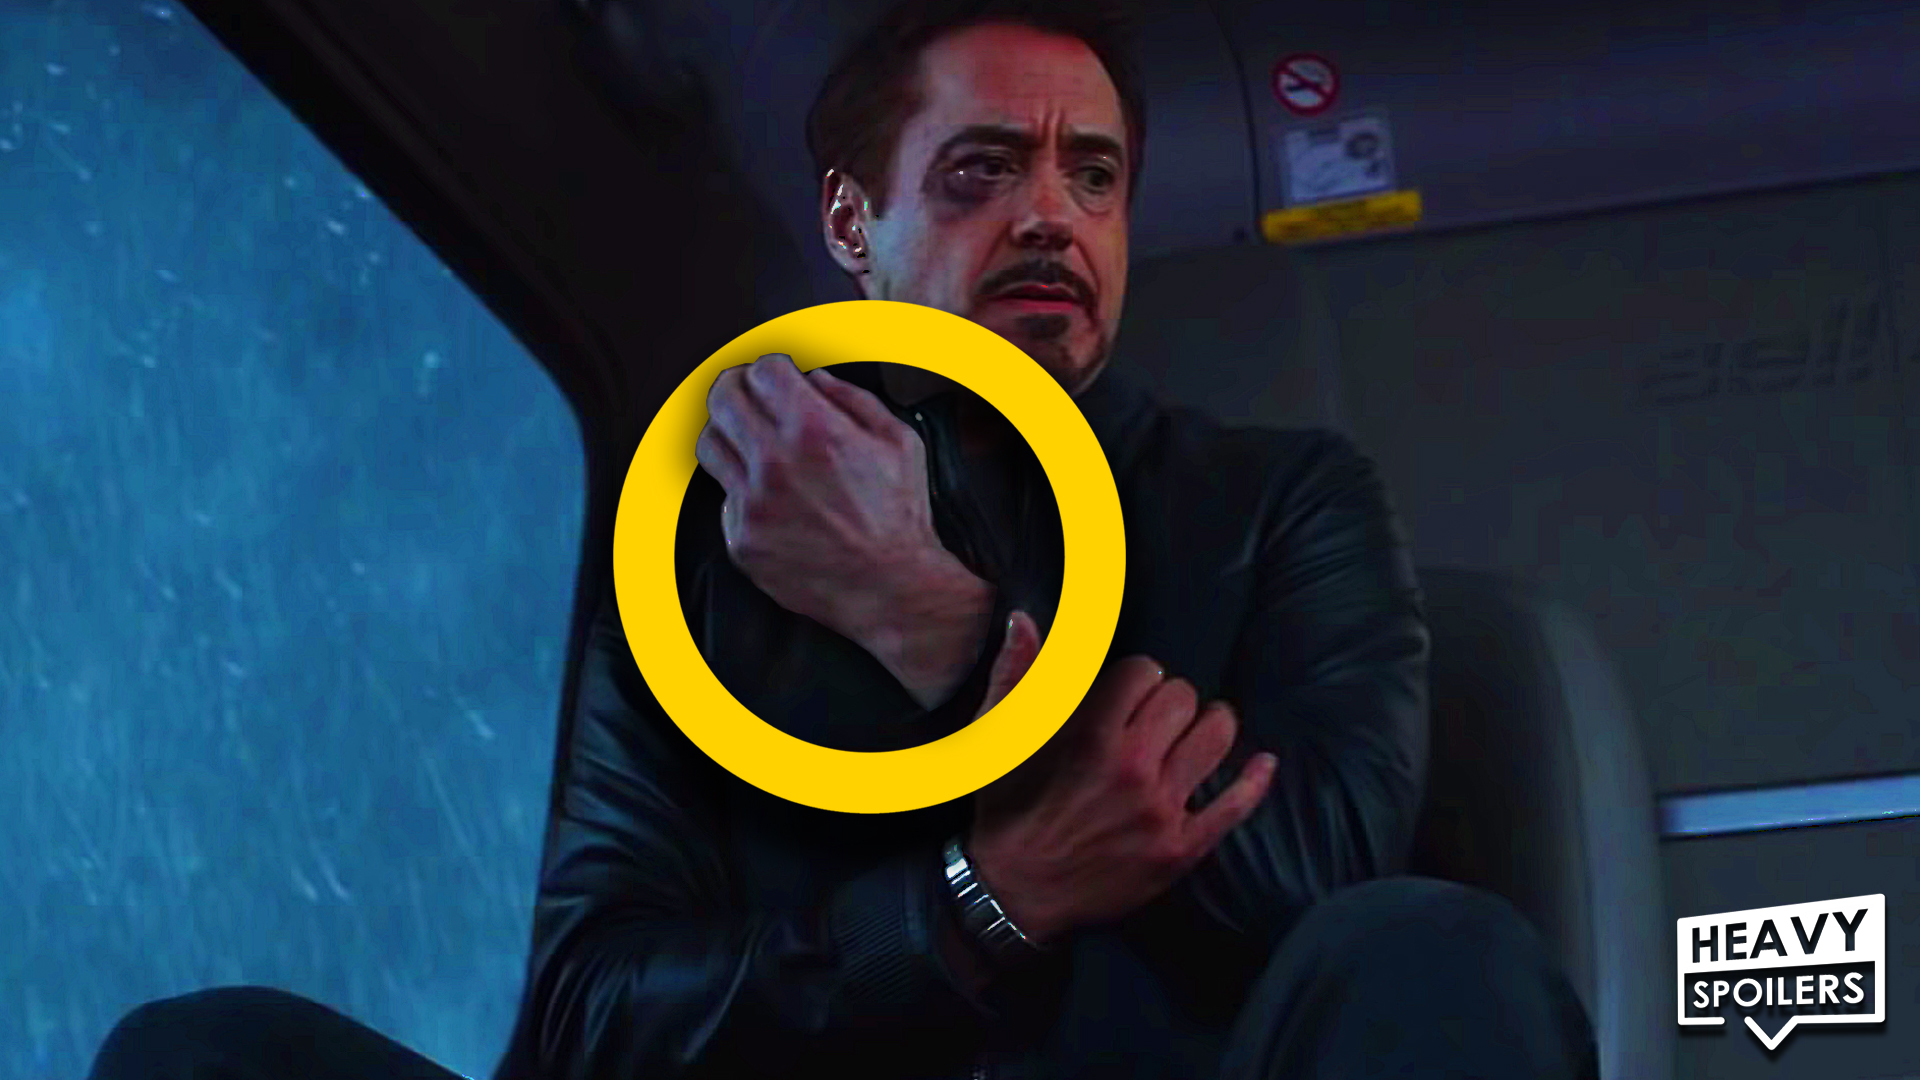 mcu best easter egg iron man left arm injury things you missed from avengers endgame infinity war captain america civil war gauntlet fan theory marvel